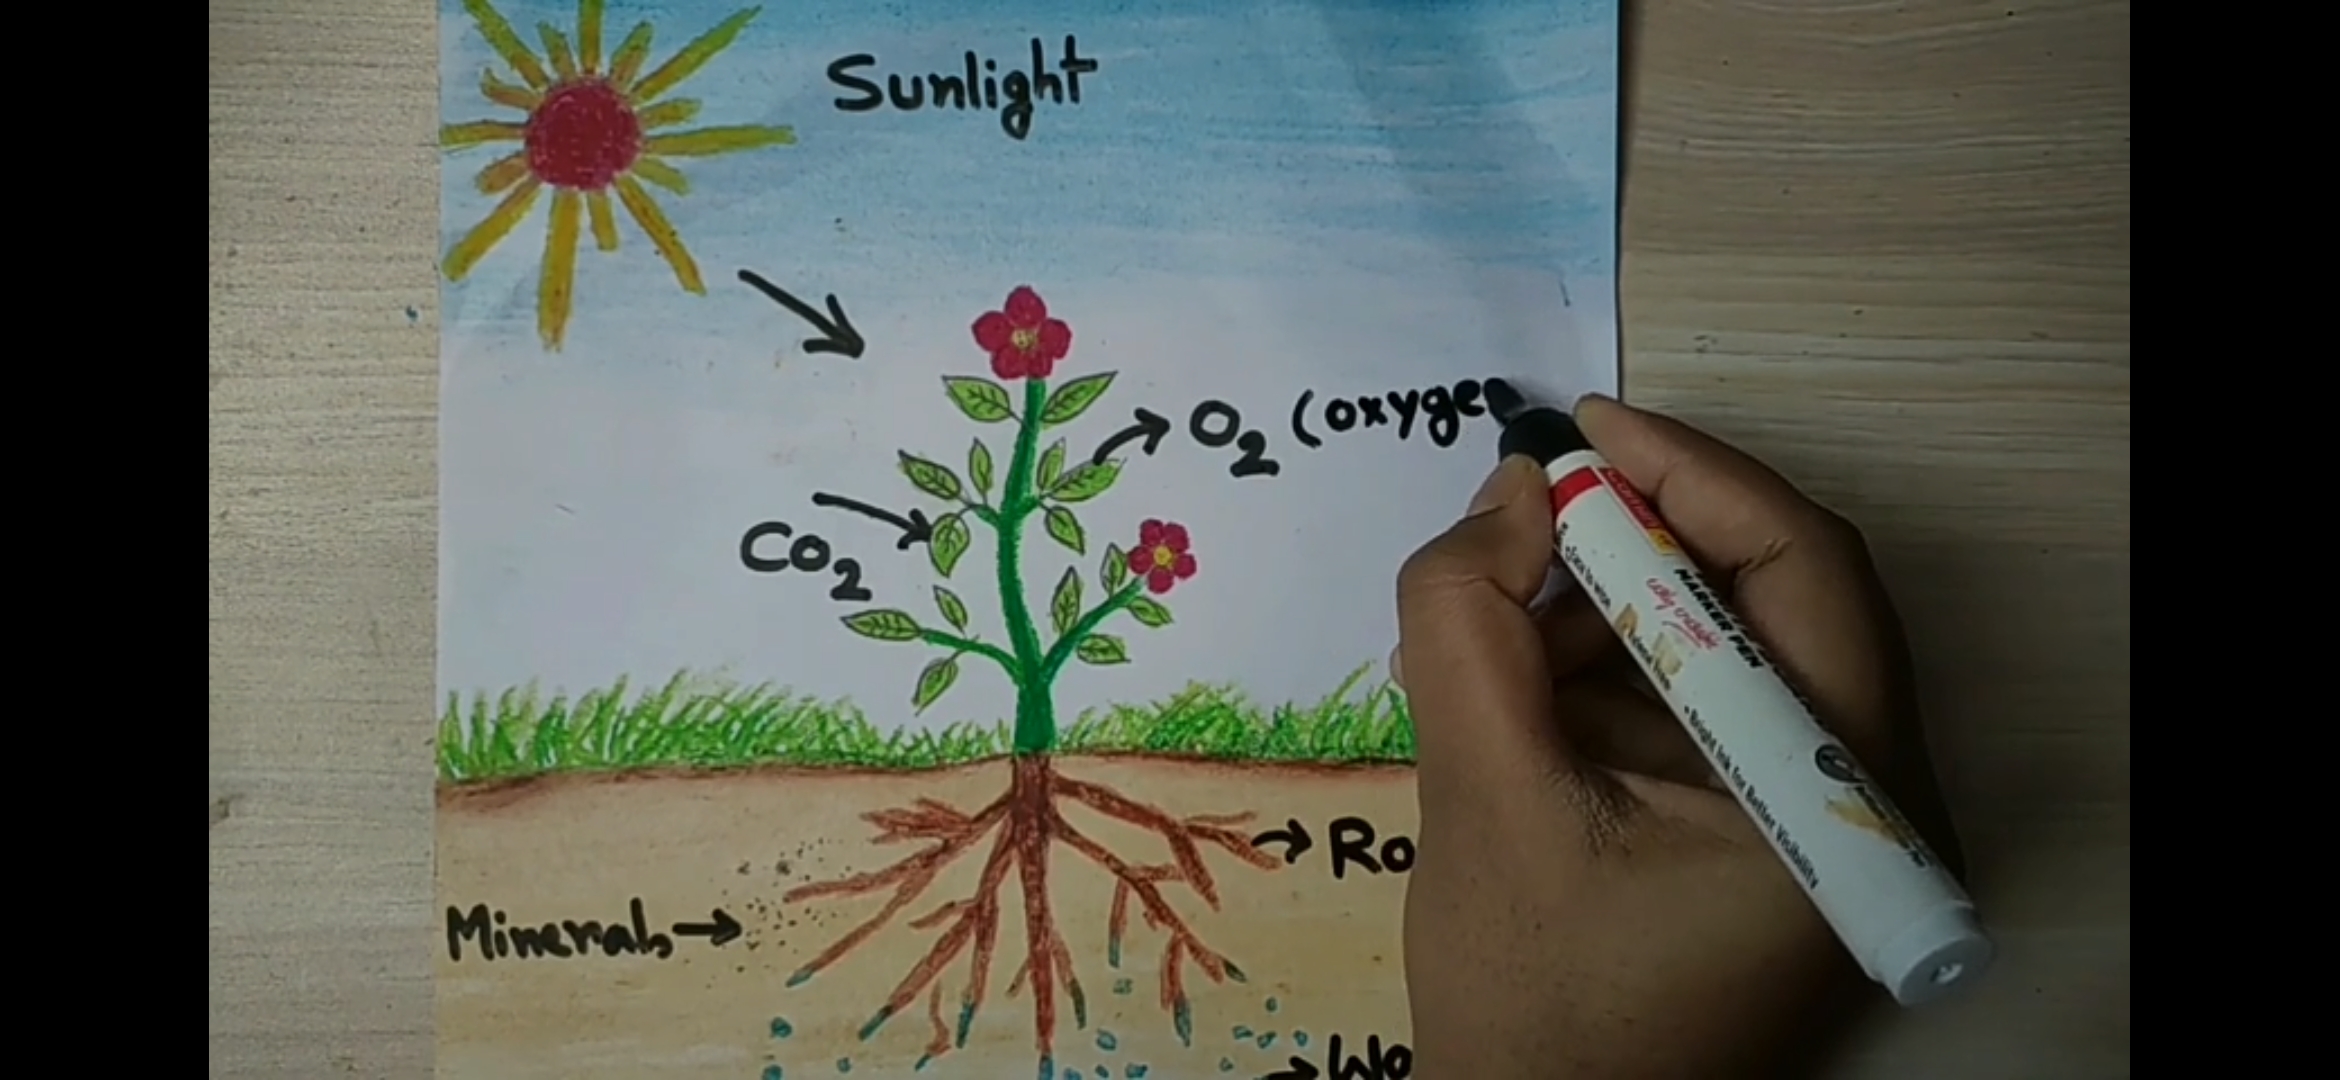 National science day drawing easy / National science day poster drawing  step by step - YouTube